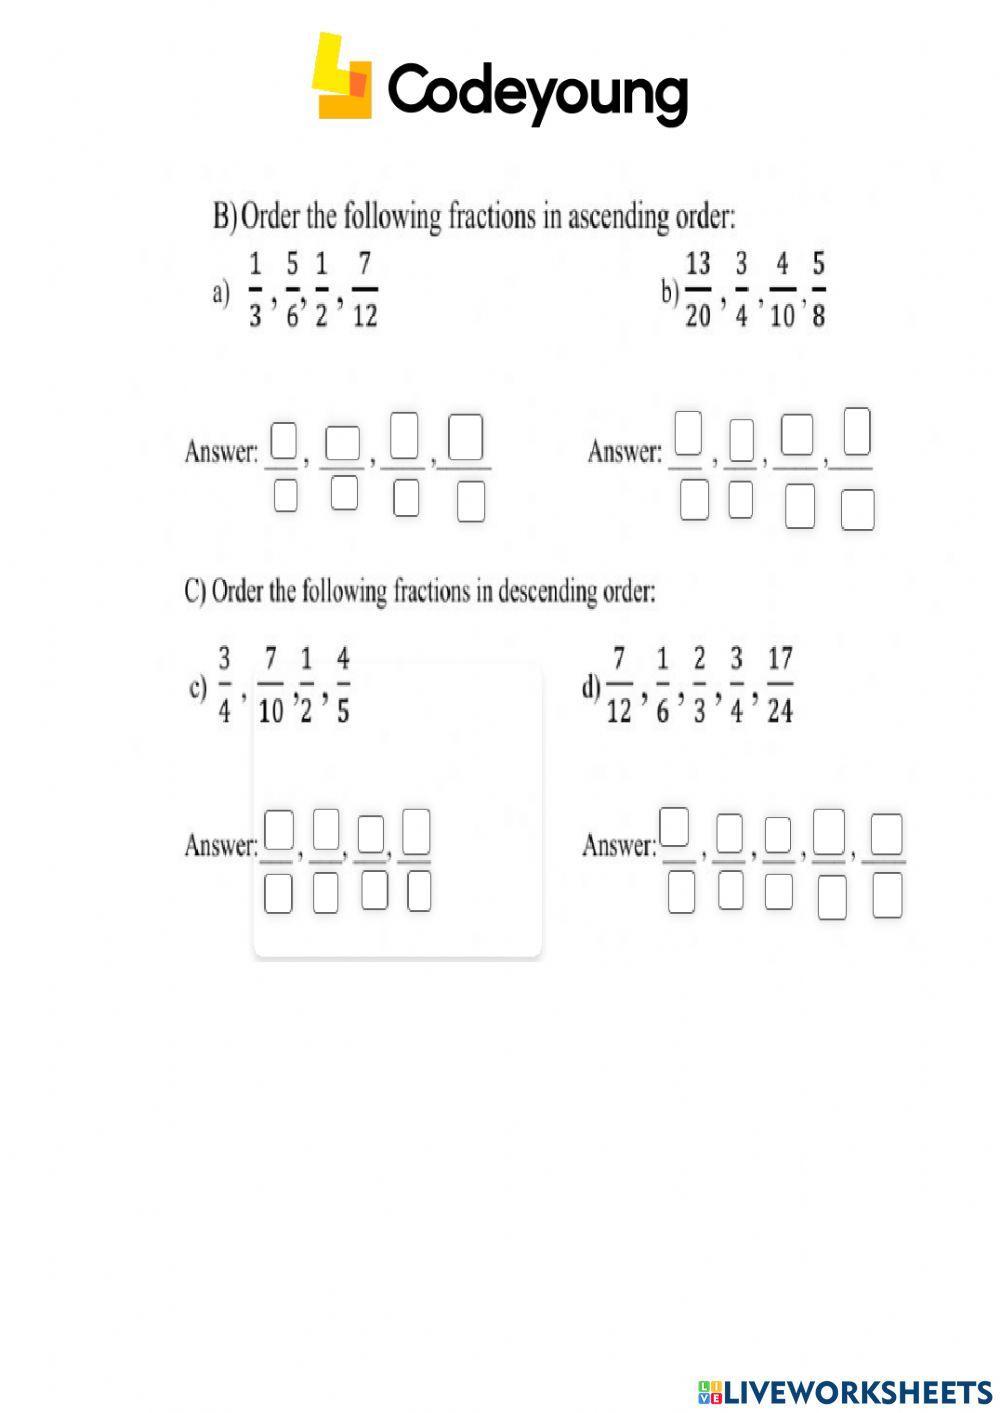 Comapring and ordering fractions